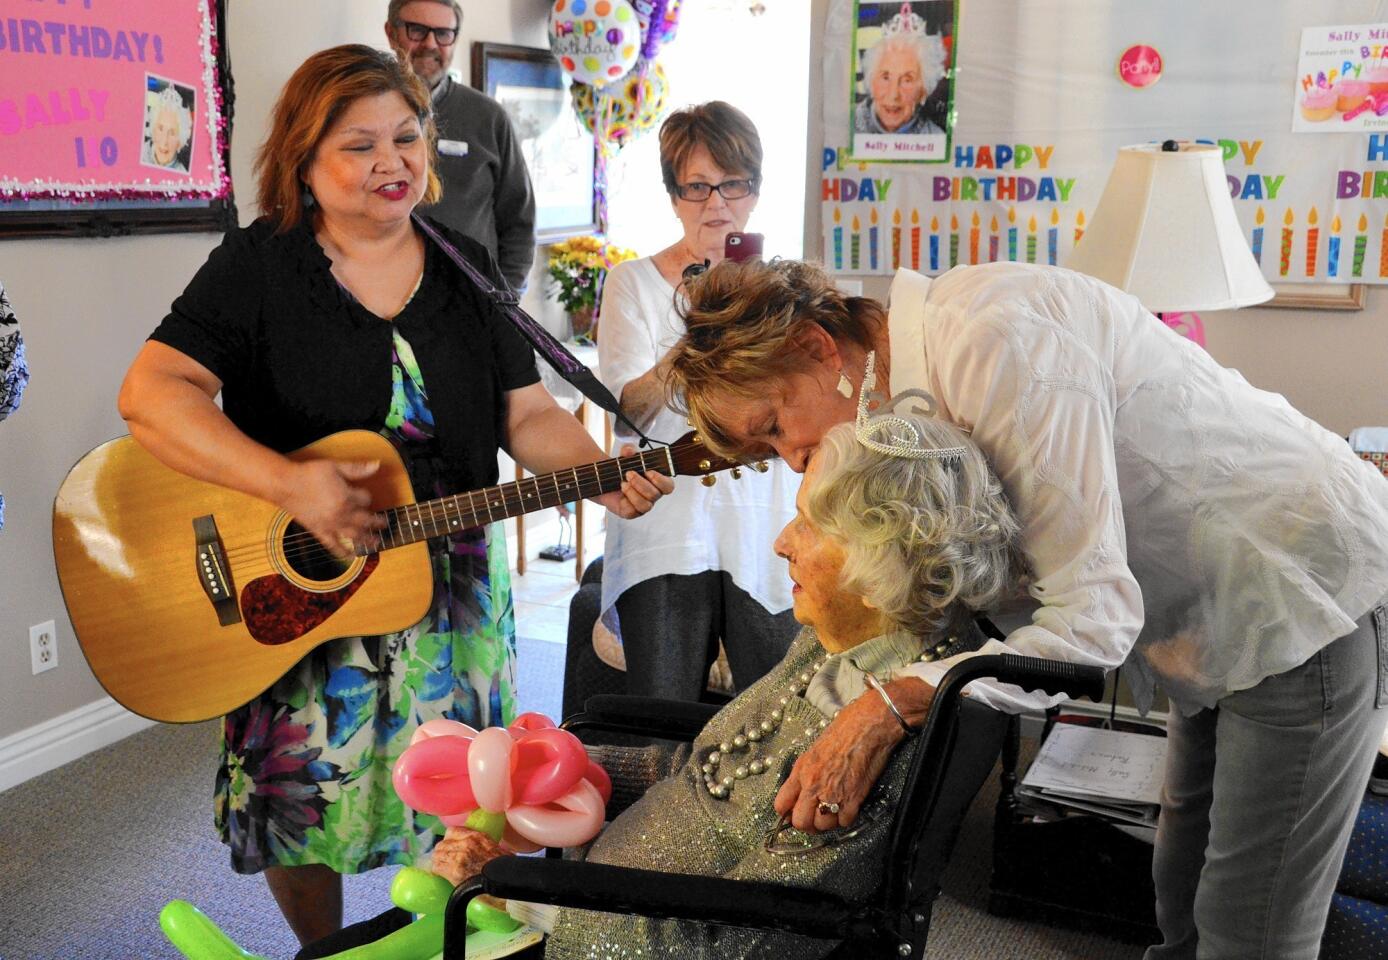 Guitarist Esther Cruz Porter serendes Sally Mitchell as part of her birthday celebration as her daughter Suzanne Becker gives her a hug.